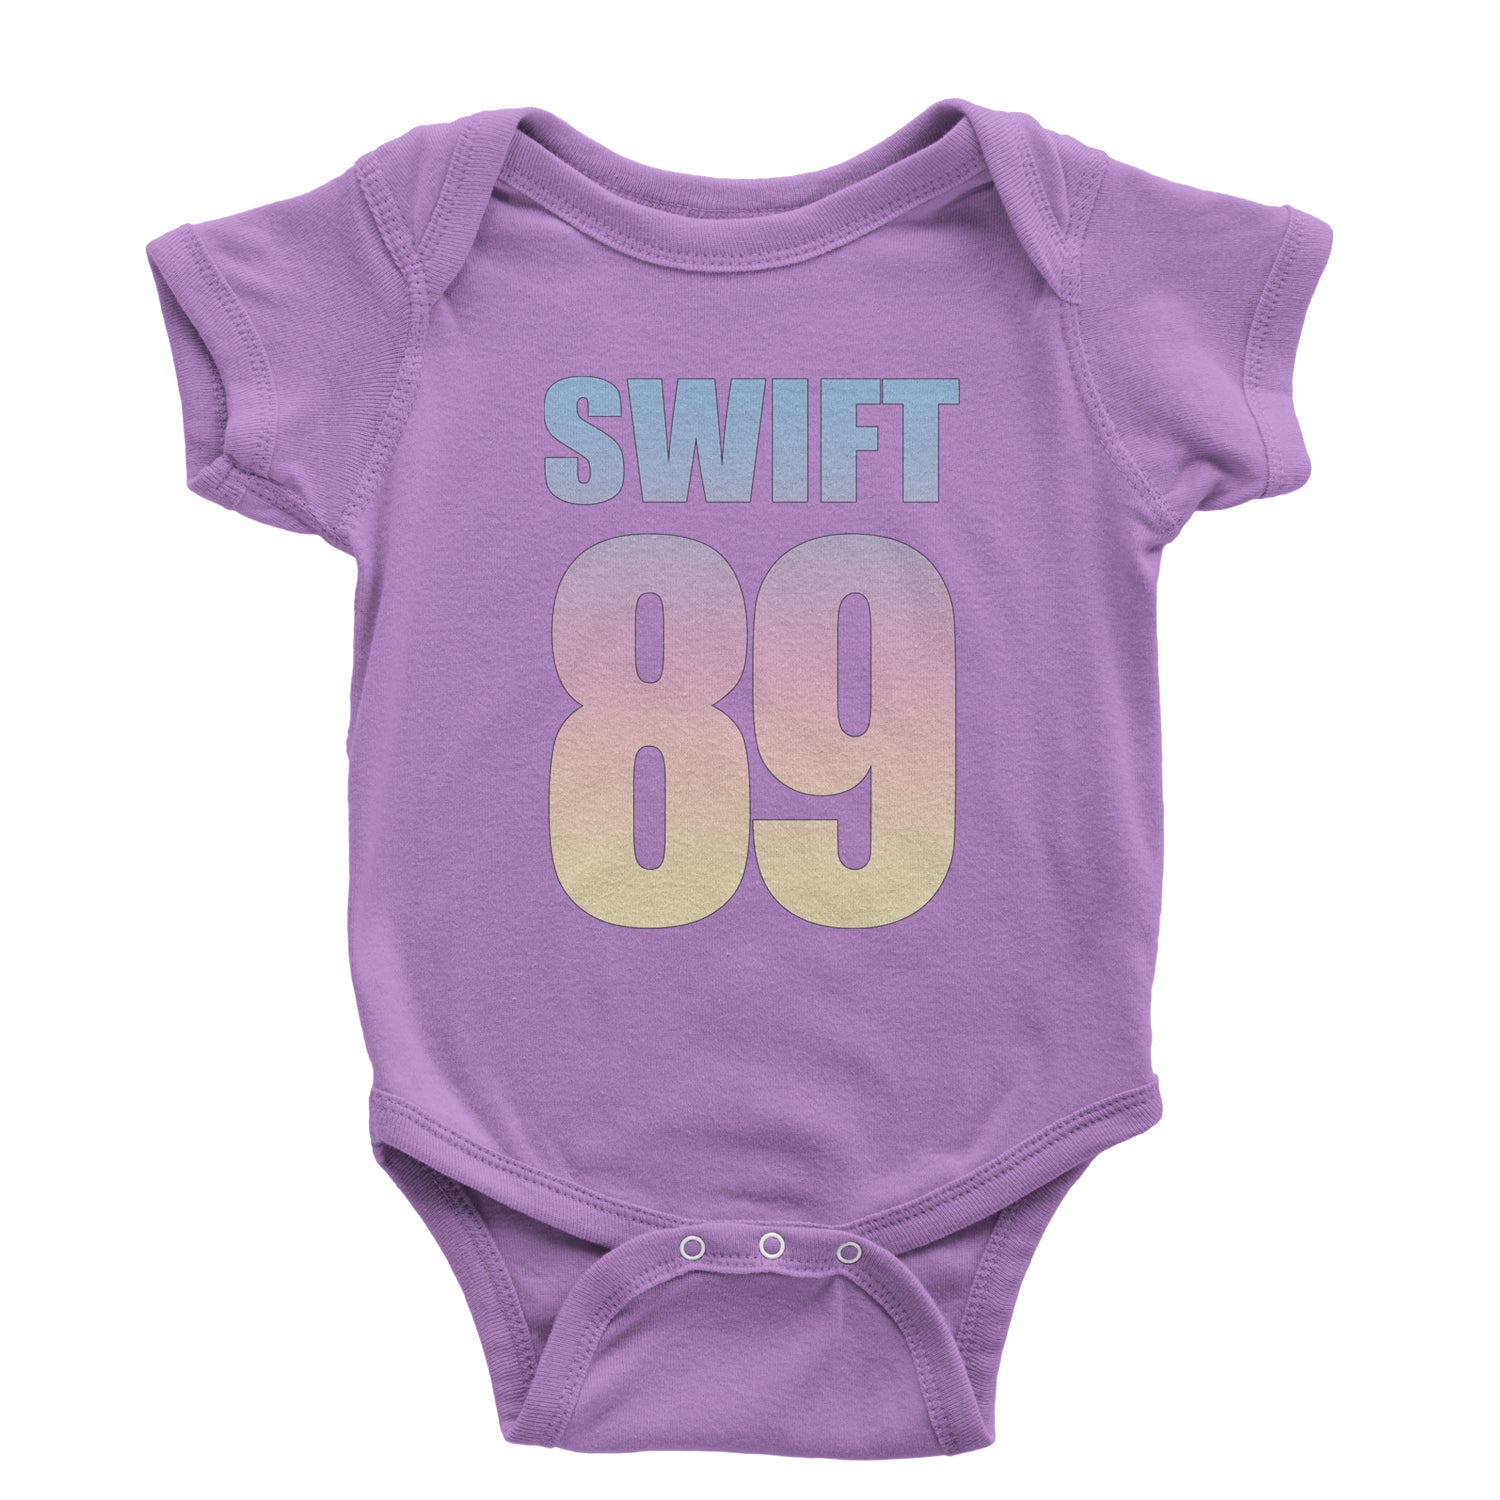 Lover Era Swift 89 Birth Year Music Fan Infant One-Piece Romper Bodysuit and Toddler T-shirt